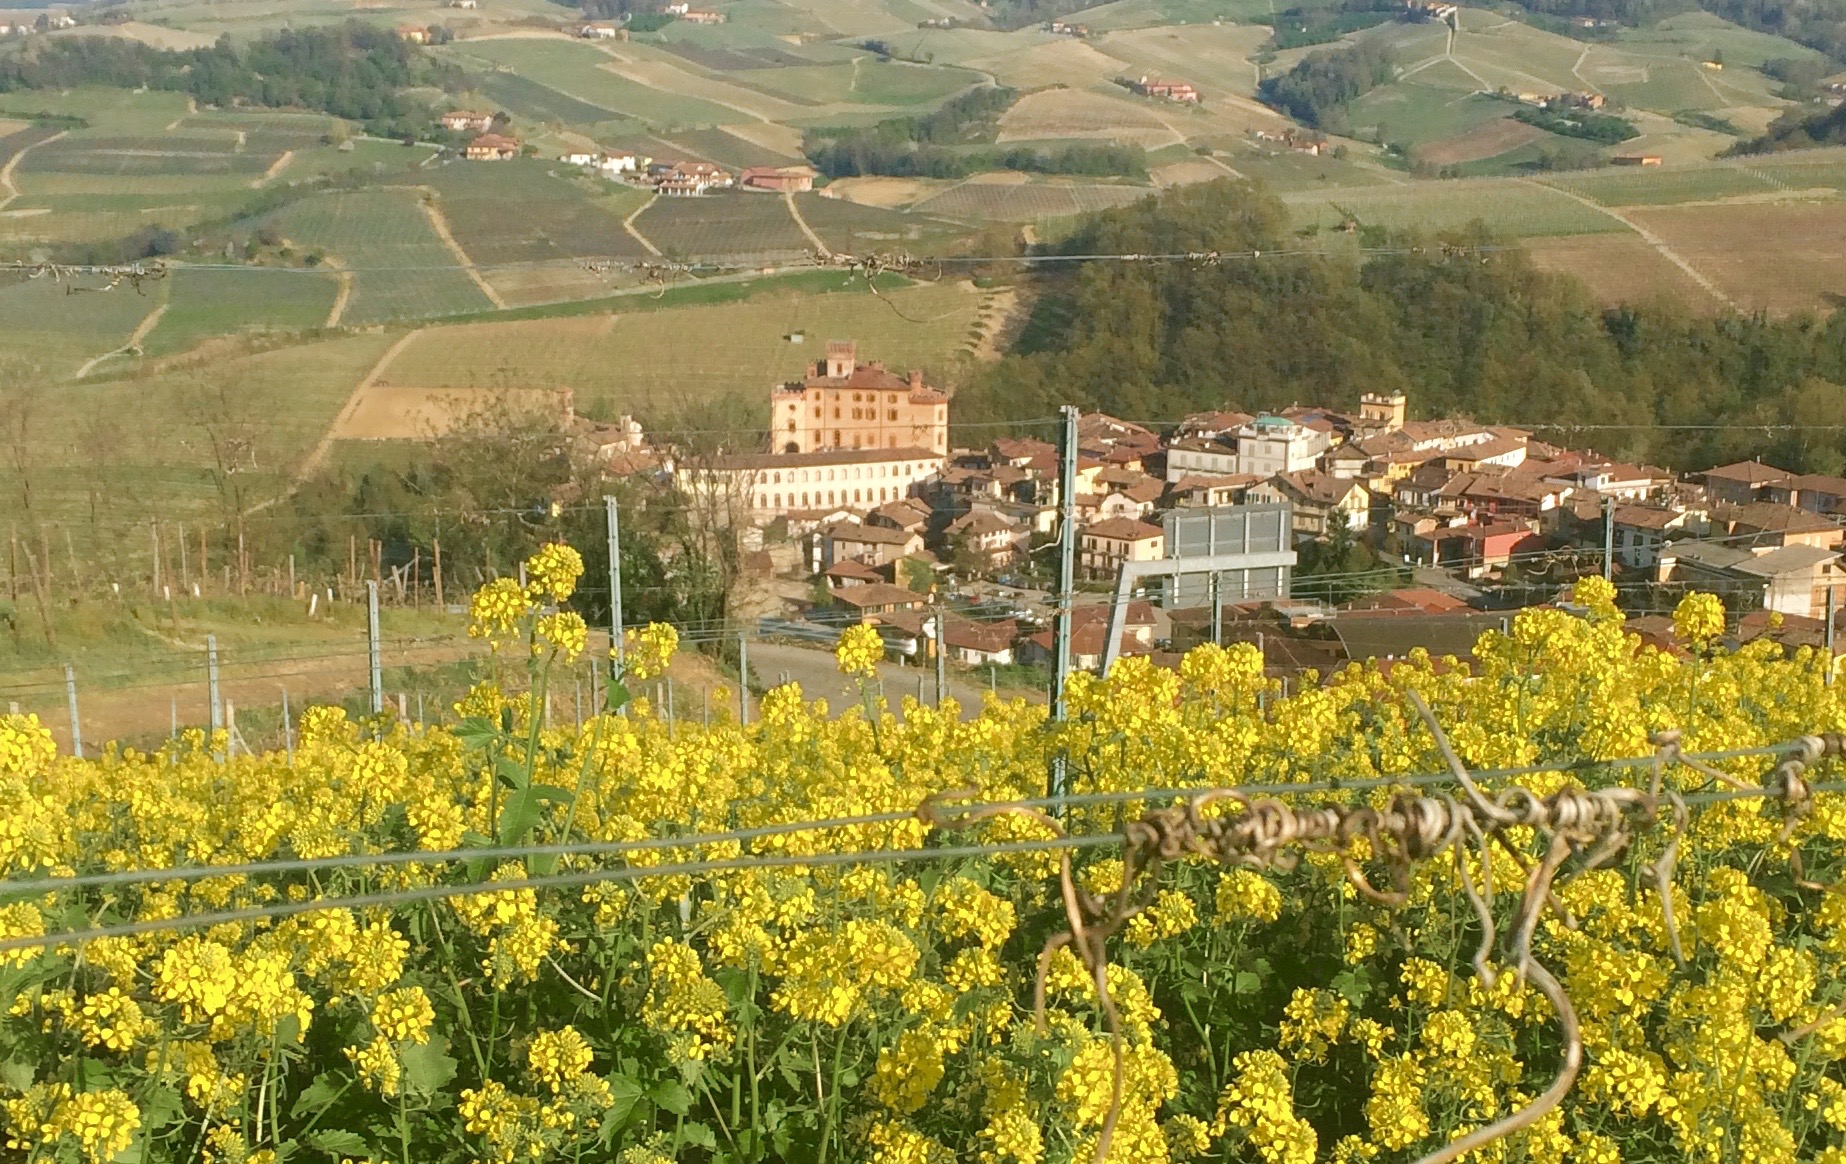 The village of Barolo, surrounded by vineyards. Castello Falletti in view as well. Photo by Marla Norman